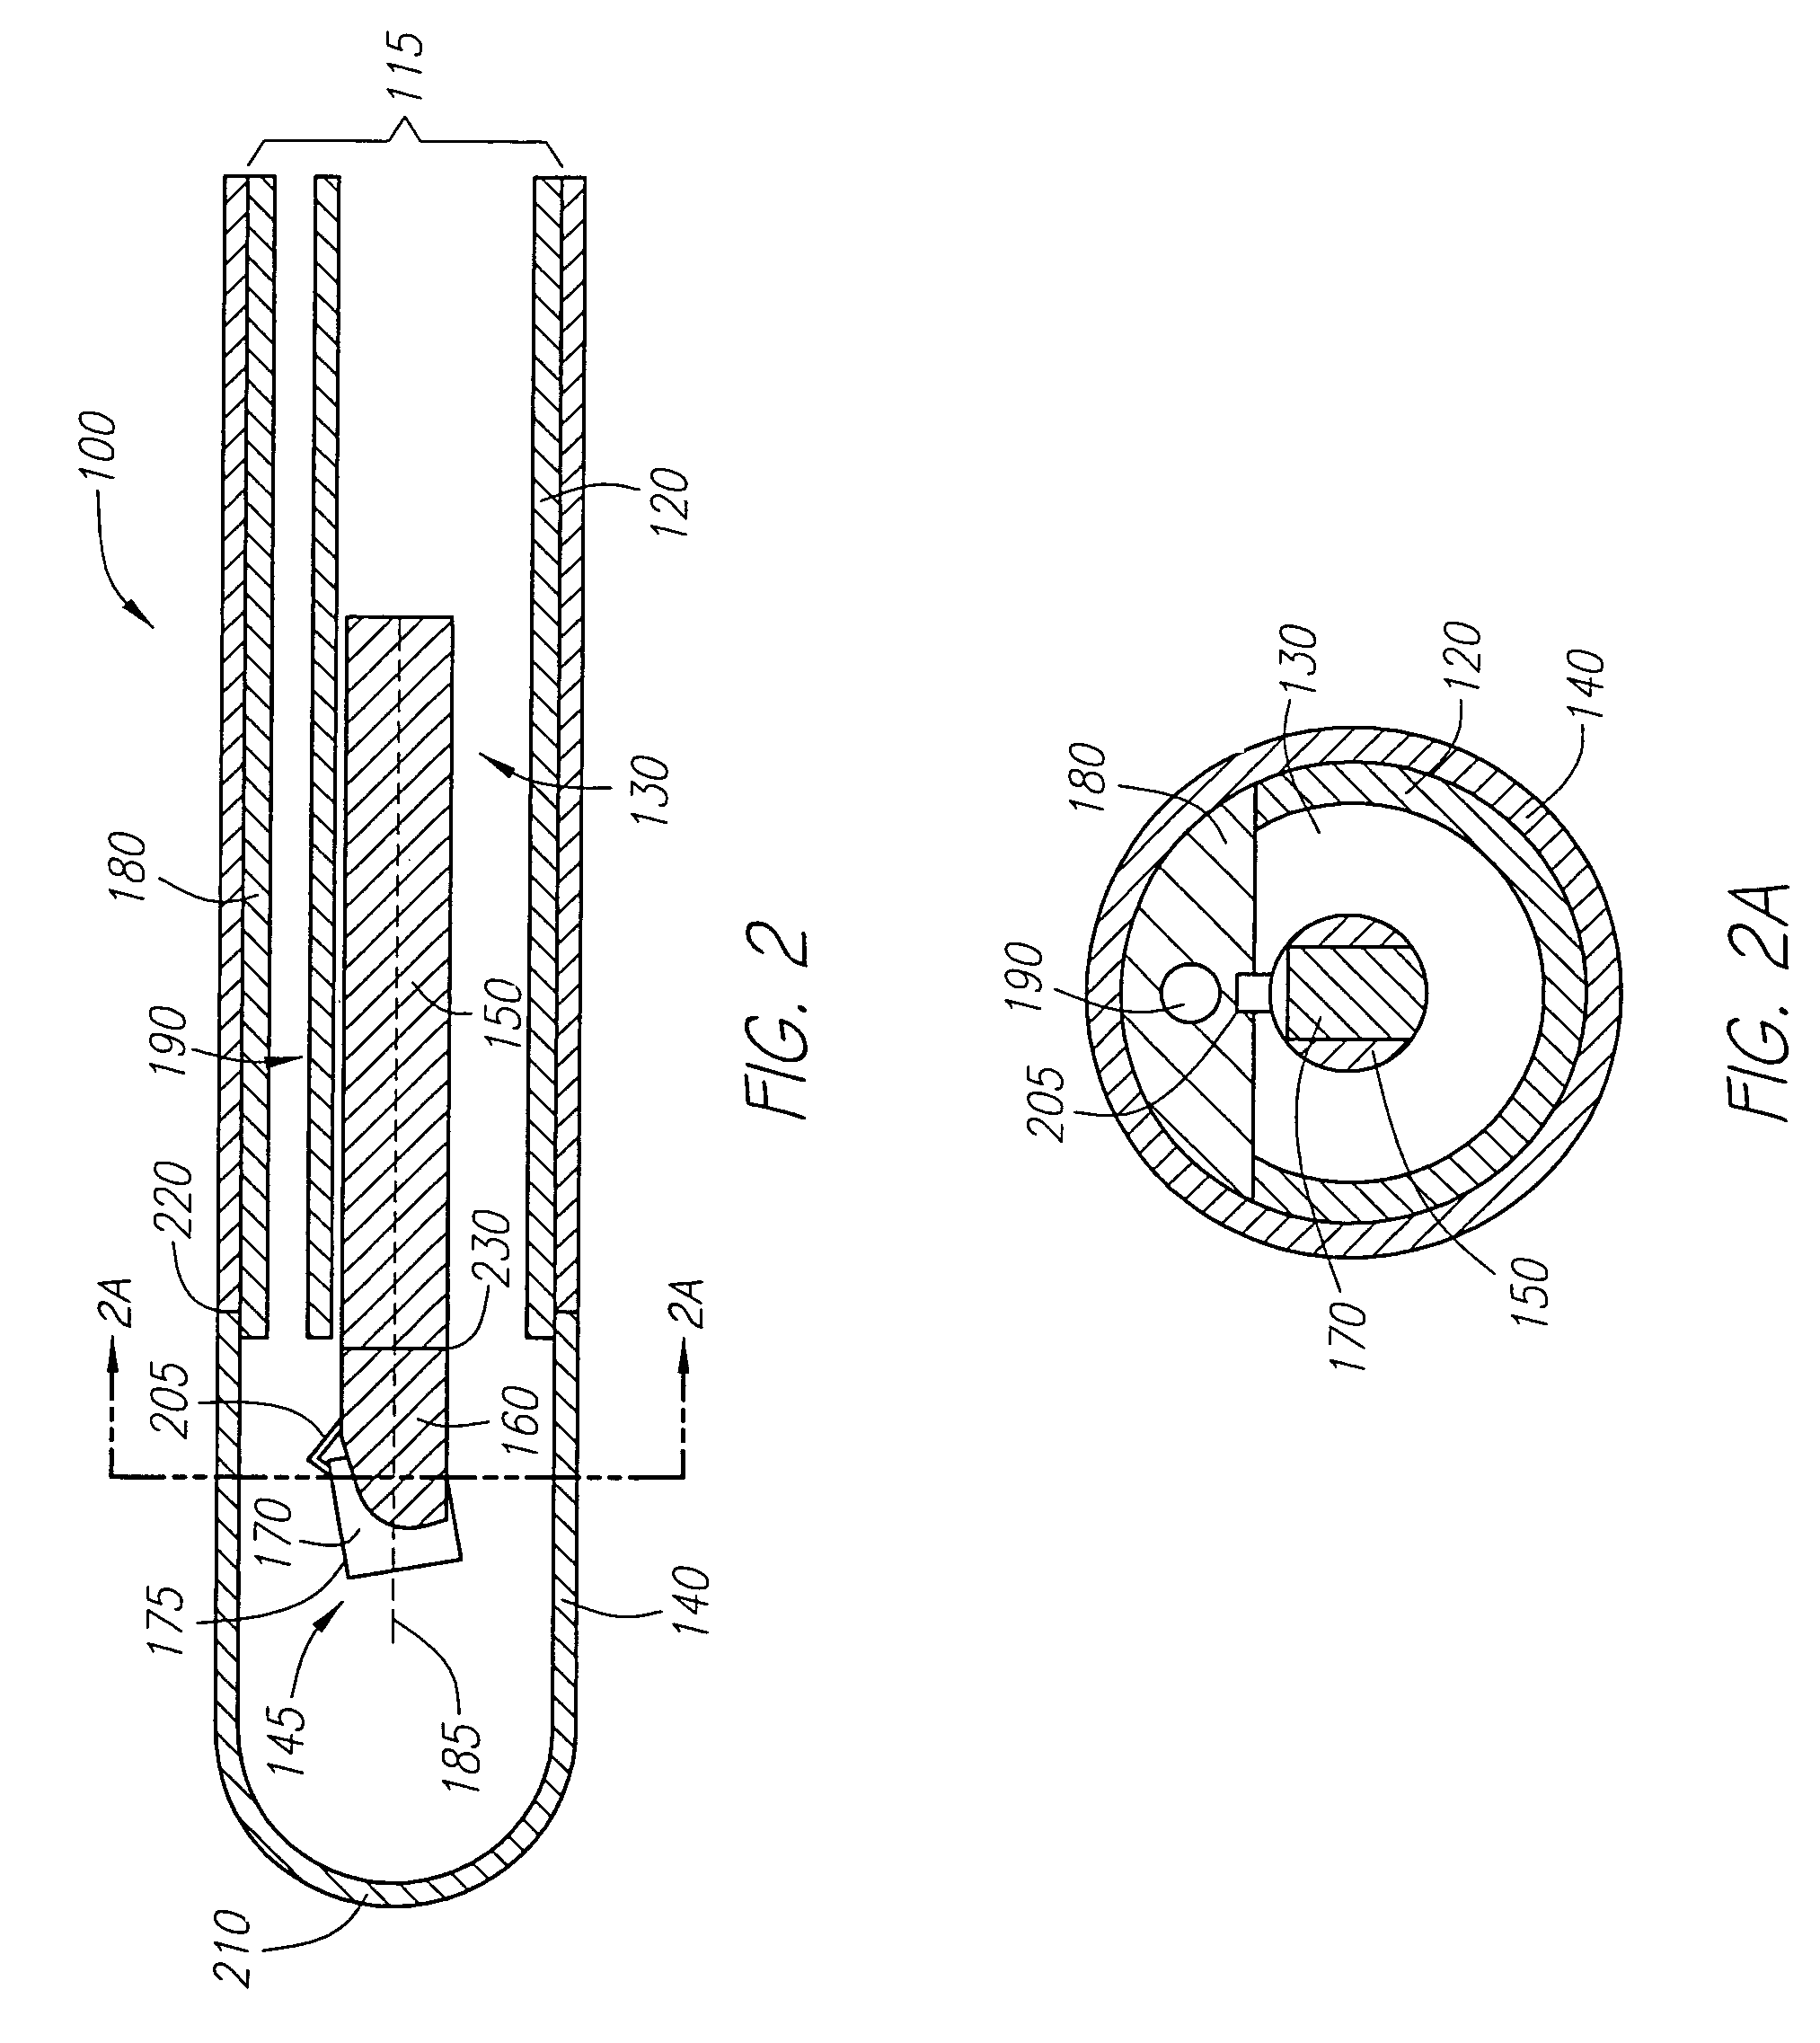 Method of mounting a transducer to a driveshaft